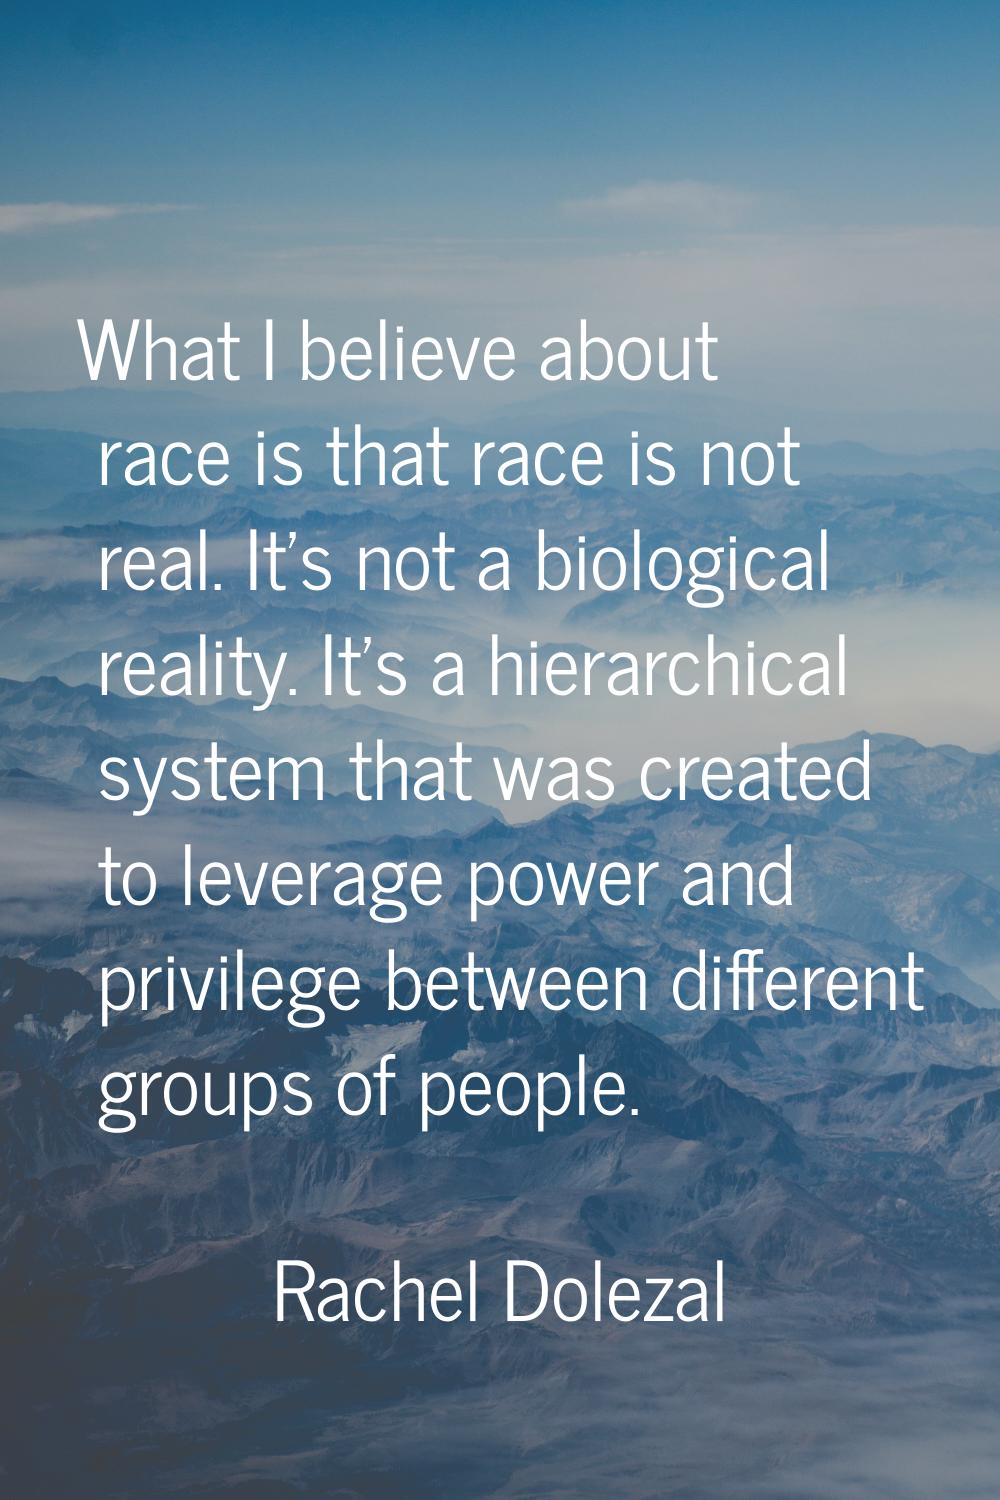 What I believe about race is that race is not real. It's not a biological reality. It's a hierarchi